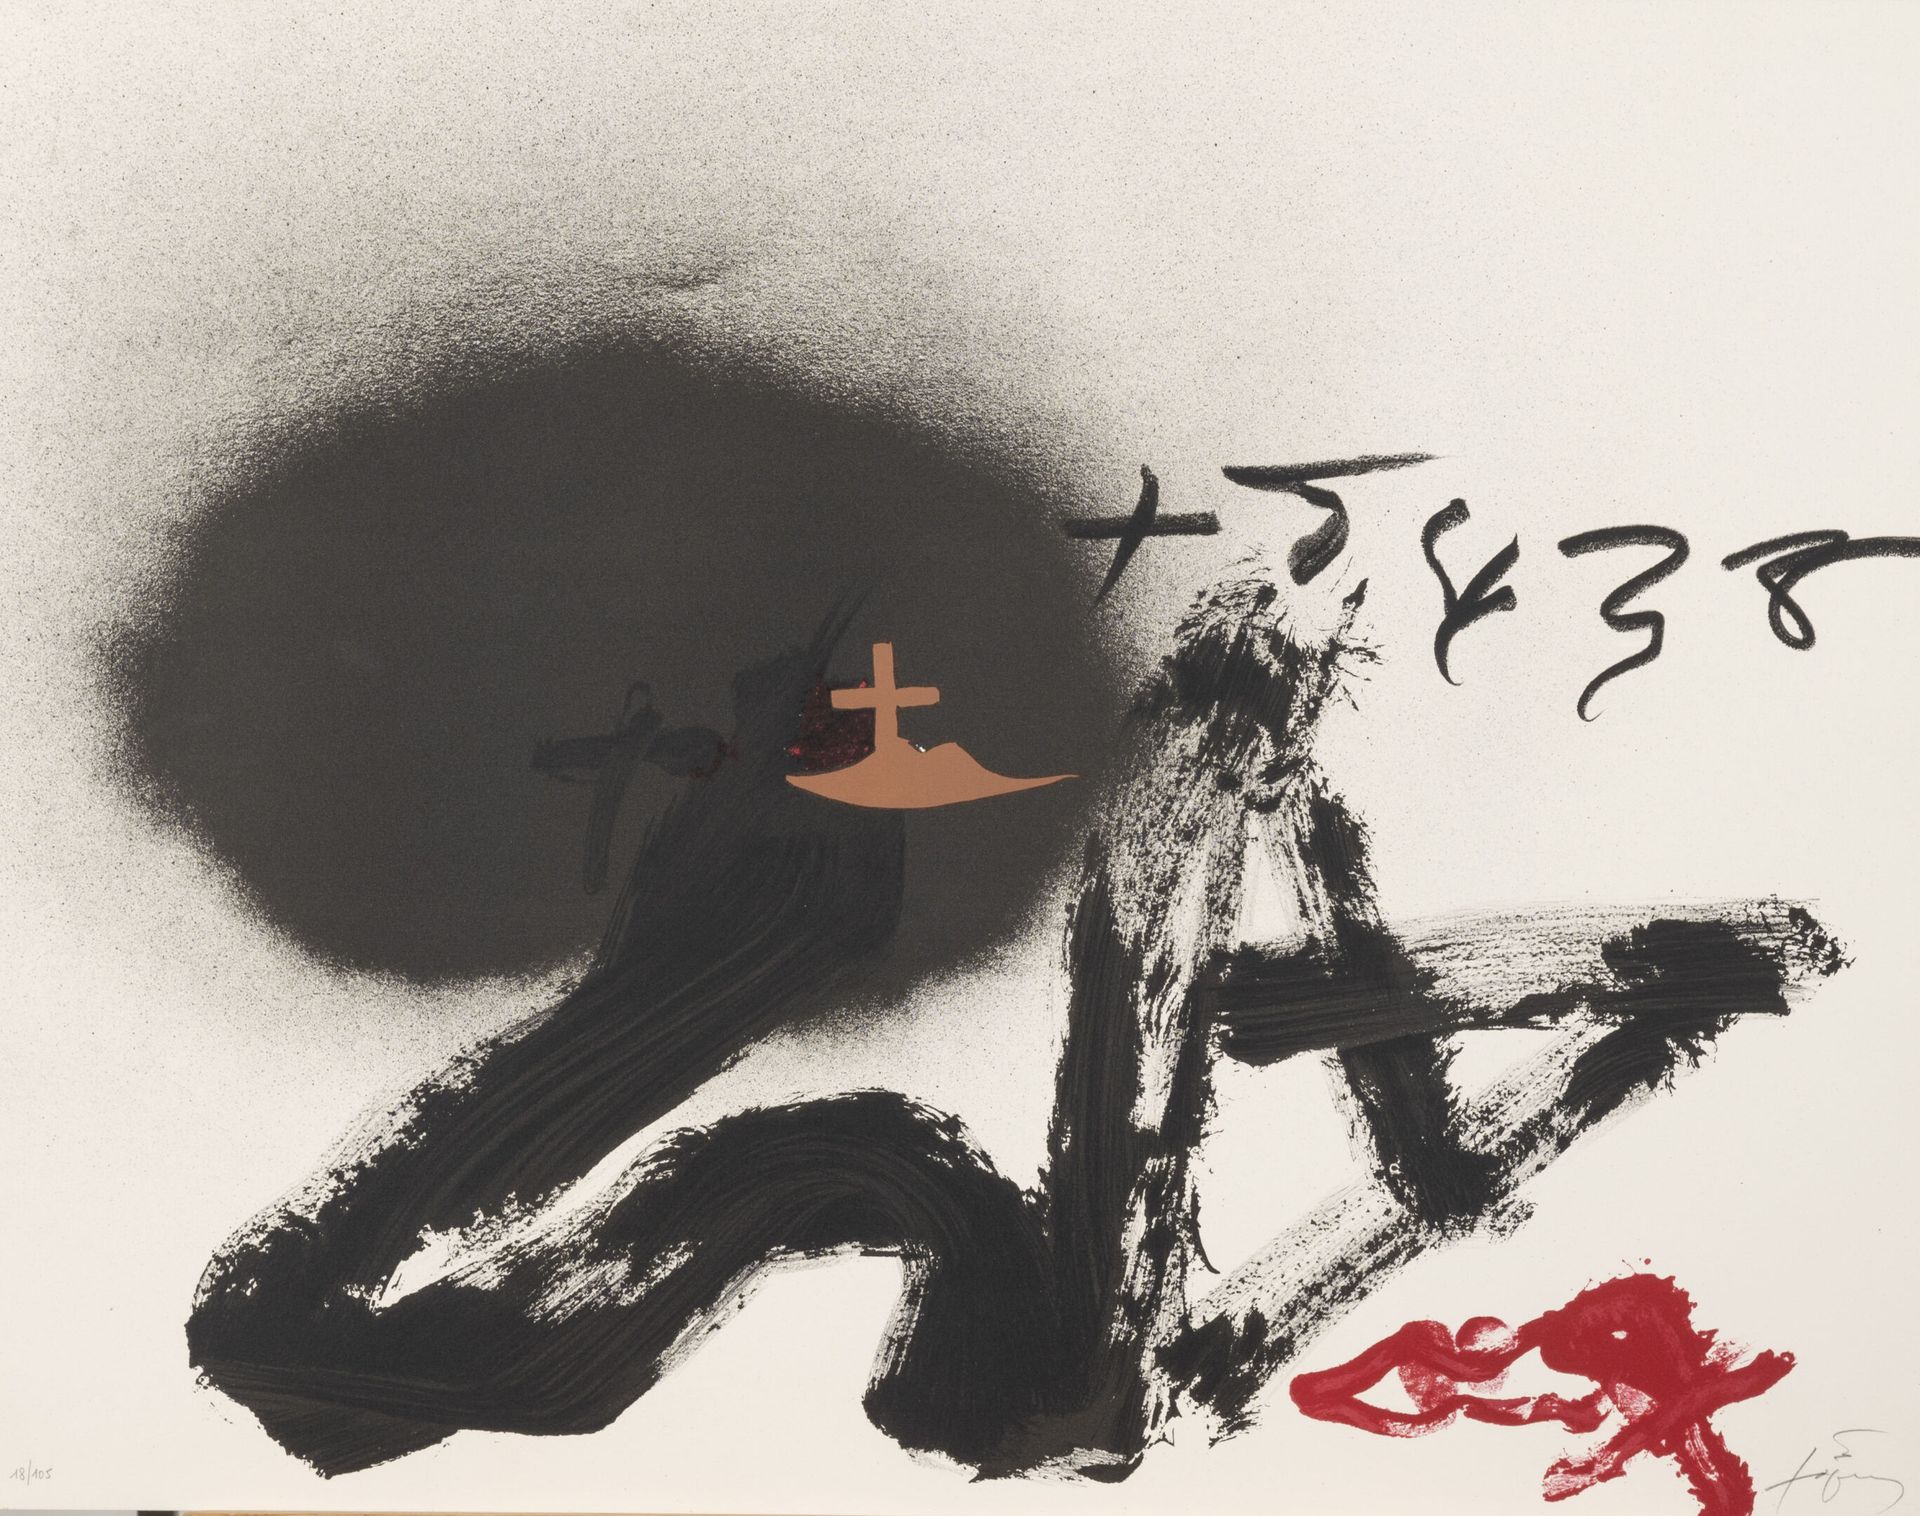 Antoni TAPIES (1923-2012) Untitled, 1987.
Lithograph in colors on paper.
Signed &hellip;